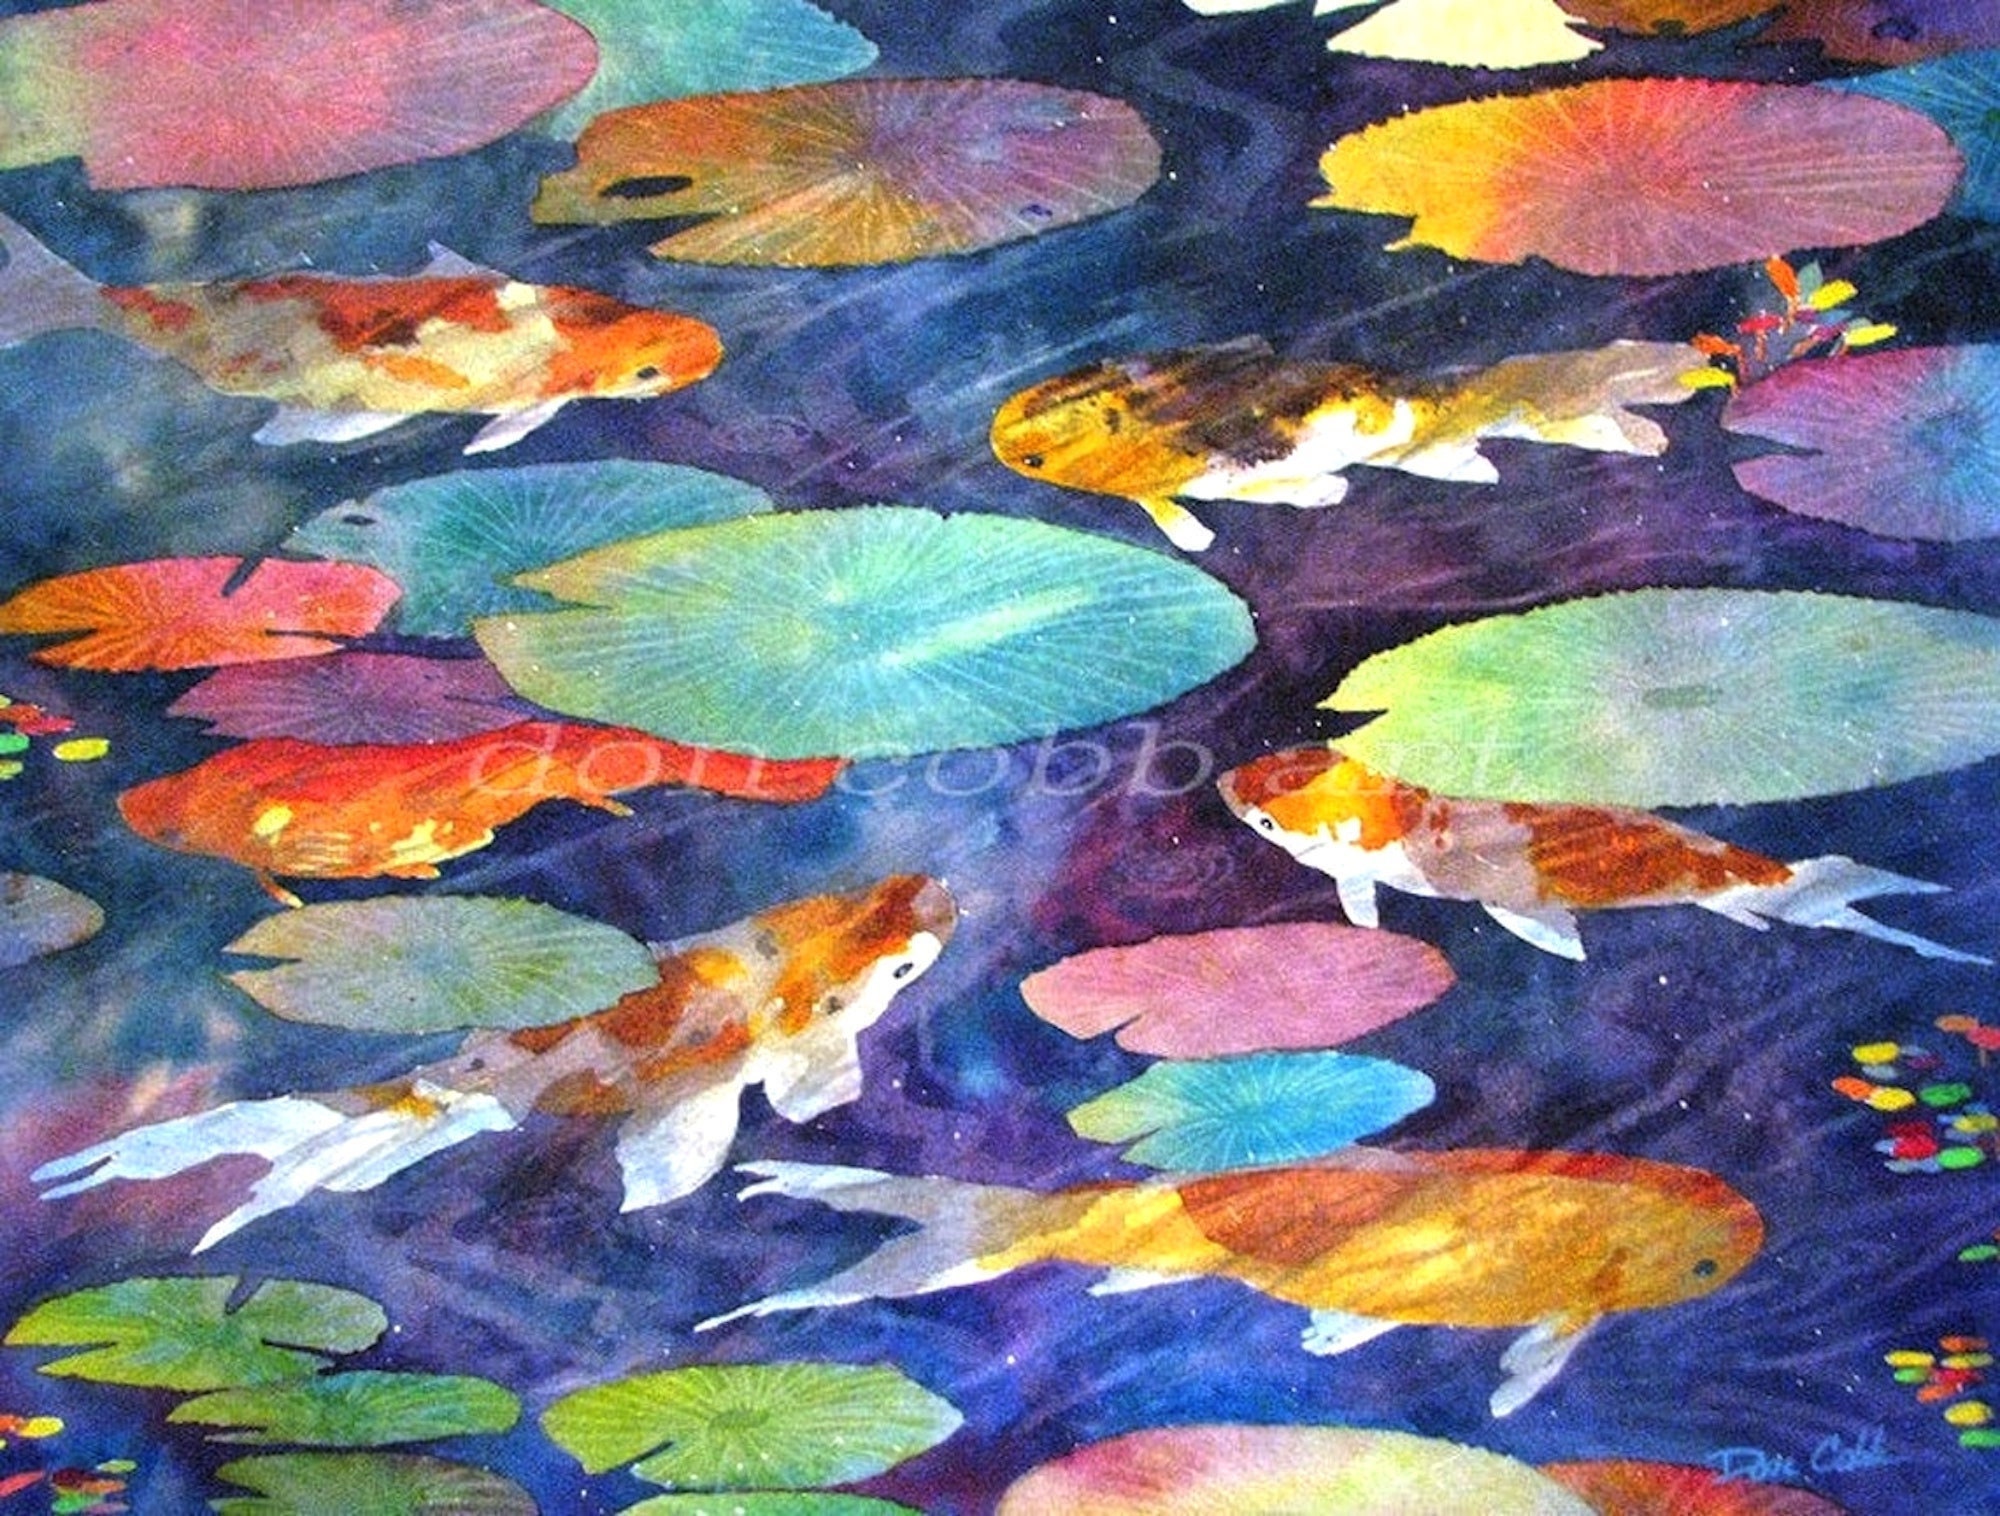 Koi - Colorful Koi Watercolor Painting - Fine Art Print from Original  Watercolor Painting - Bright, Colorful Decor